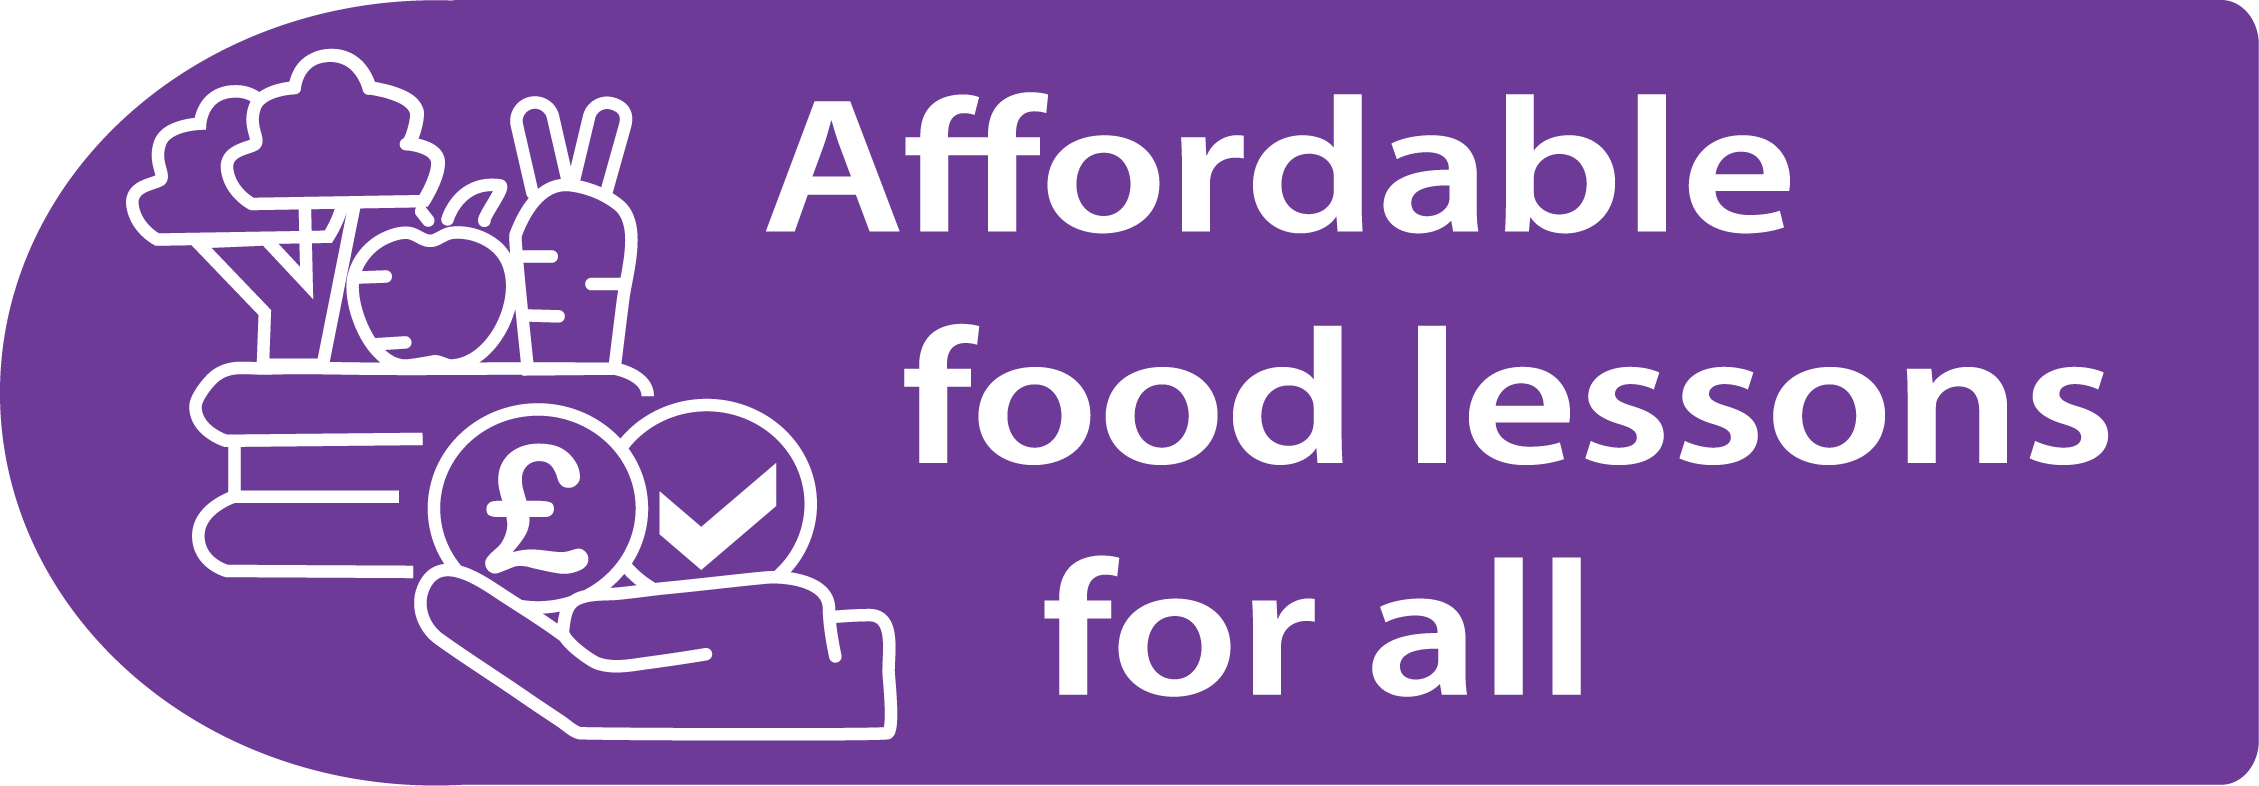 Affordable food lessons for all